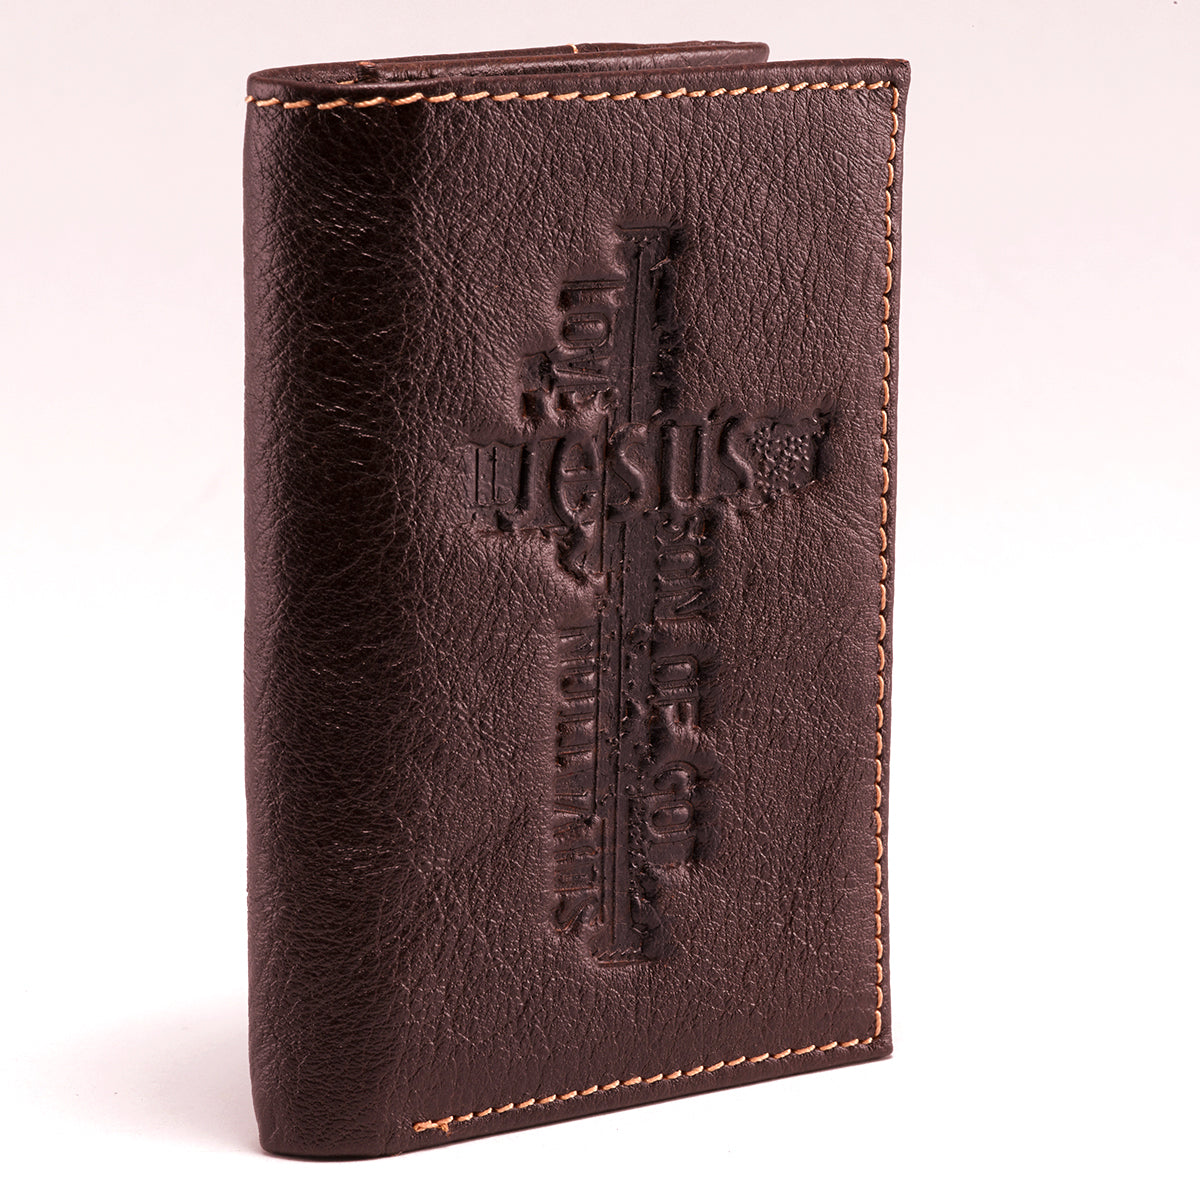 Image of Brown Genuine Leather Tri-Fold Wallet w/Cross other